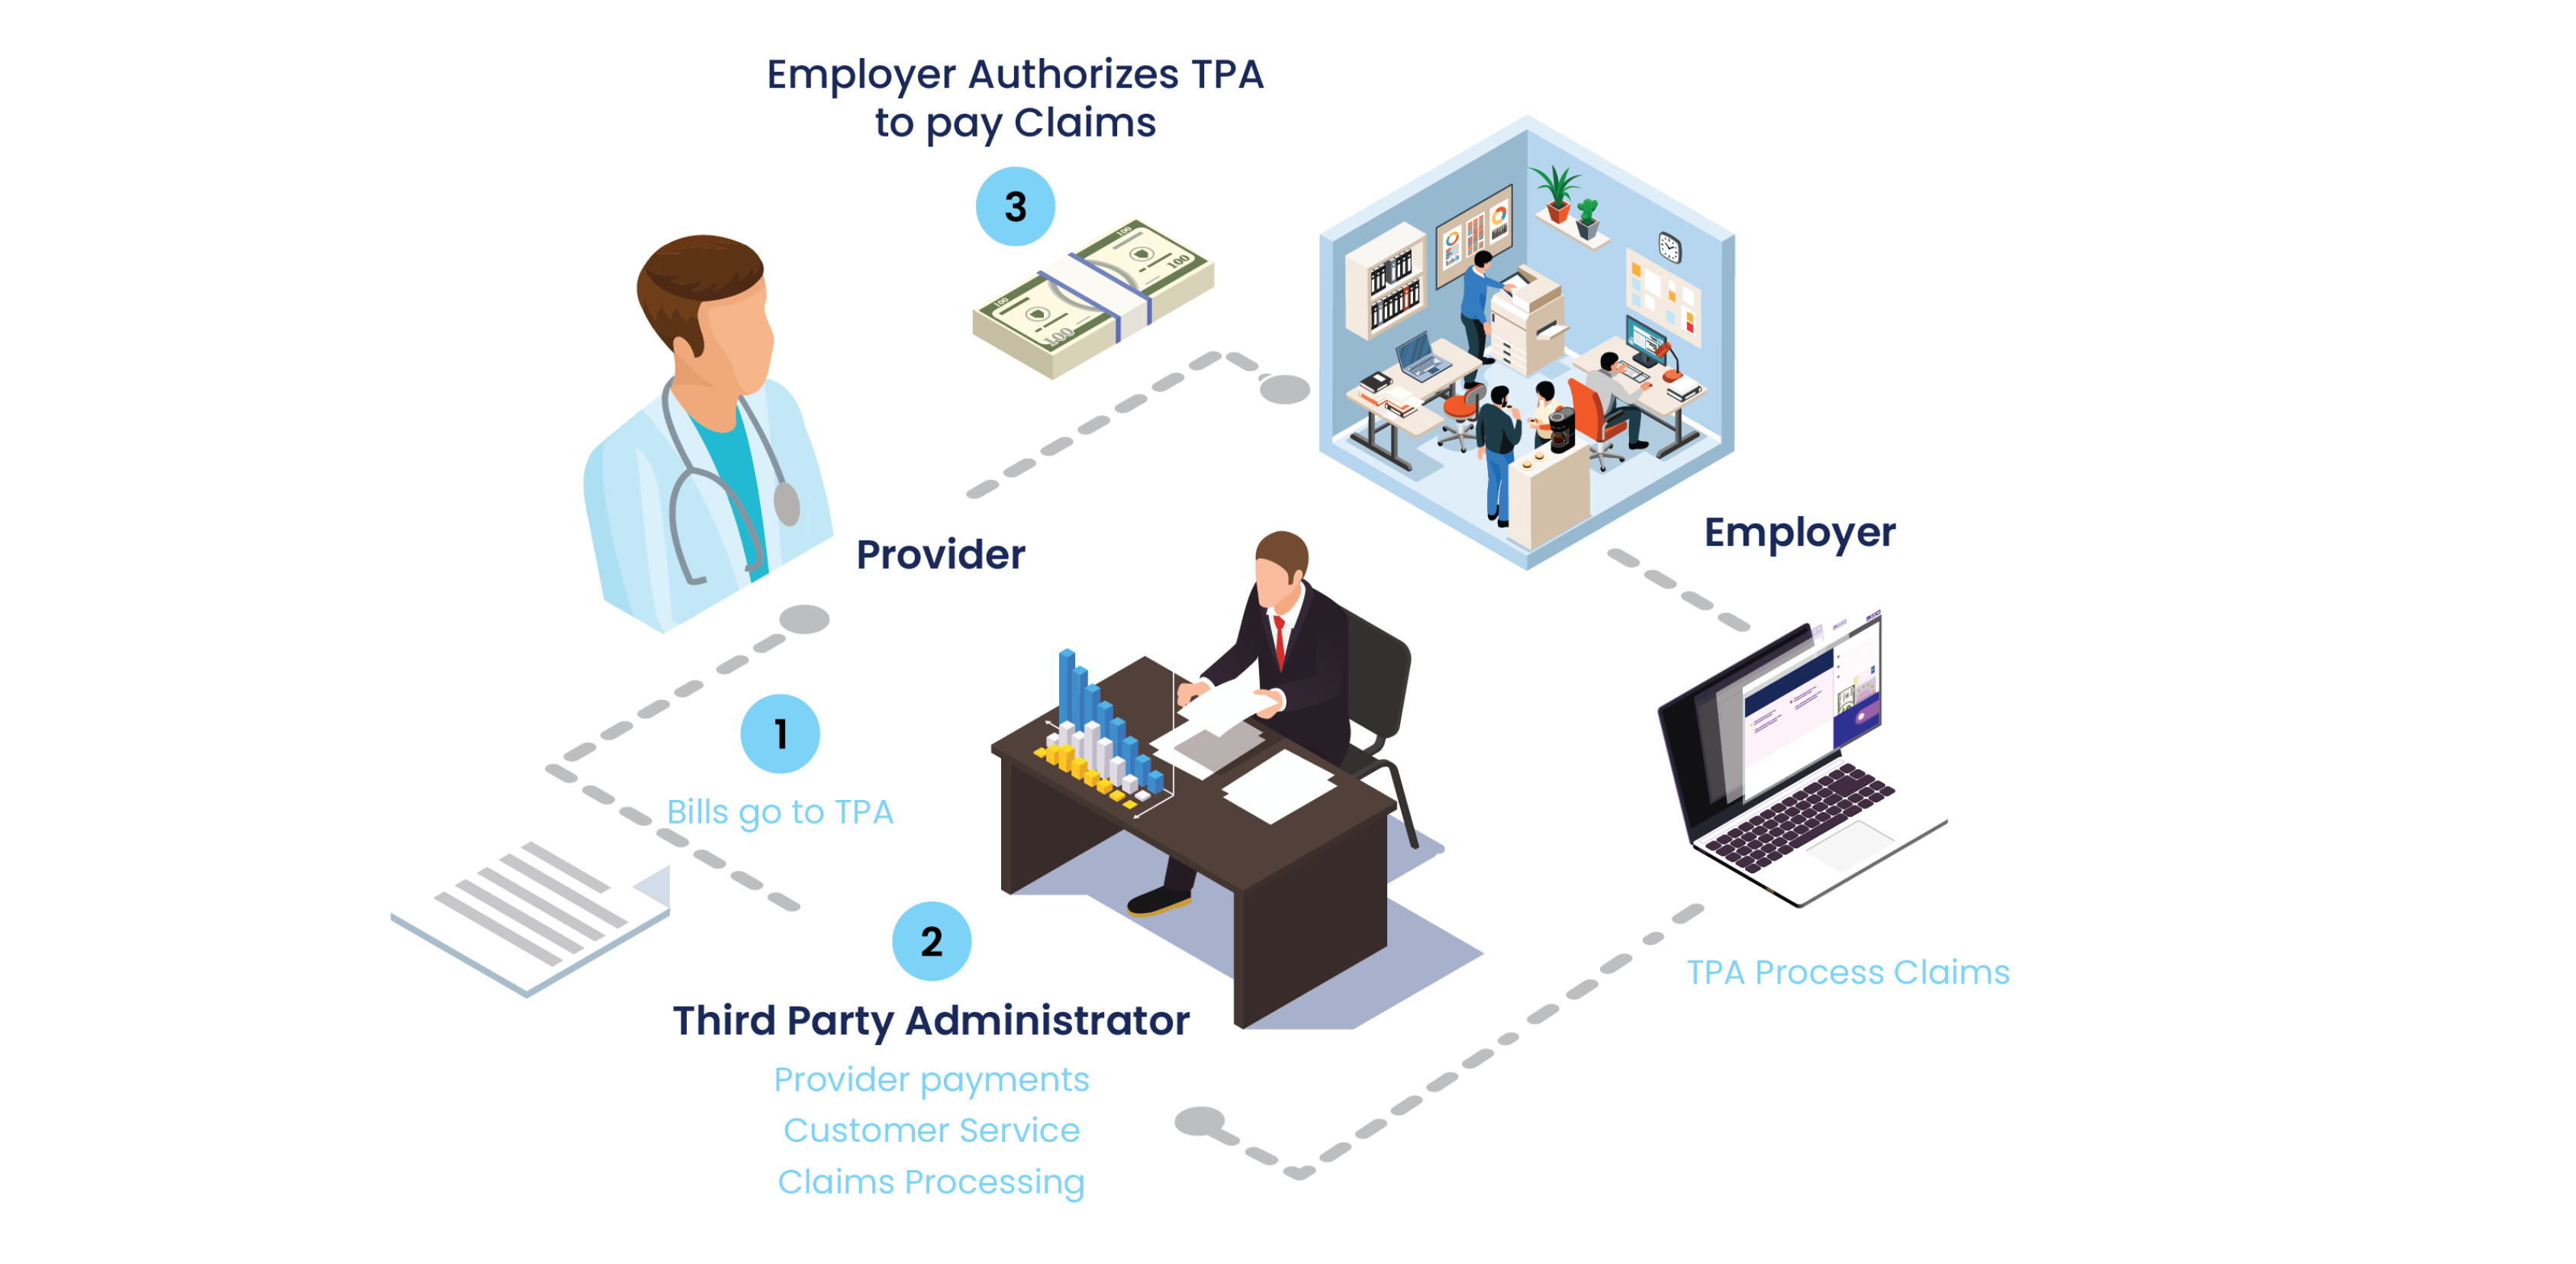 1 - bills go to tpa / 2 - third pary administrator: provider payments, customer service, & claims processing / 3 - Employer authorizes TPA to pay claims / Employer TPA processes claims